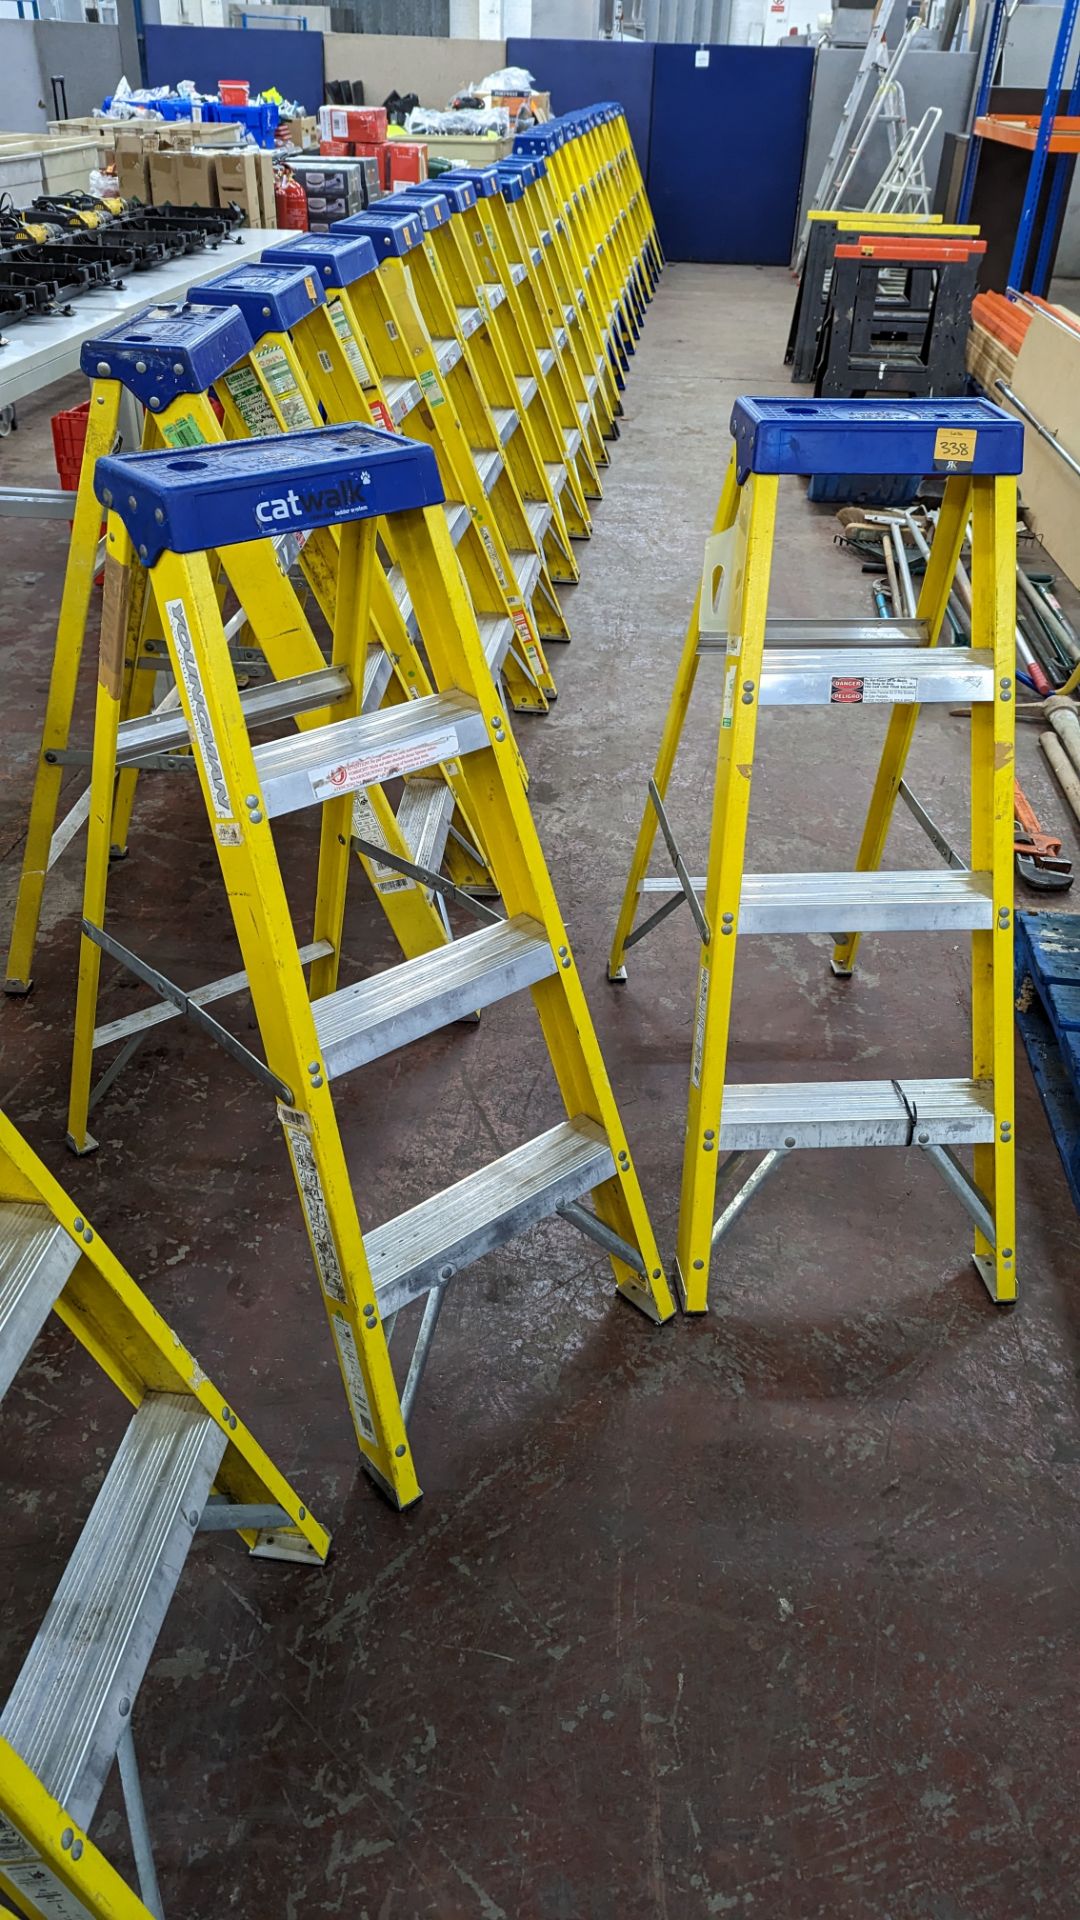 2 off Youngman 4 thread insulated stepladders. N.B. the stepladders forming lots 329 to 335 all app